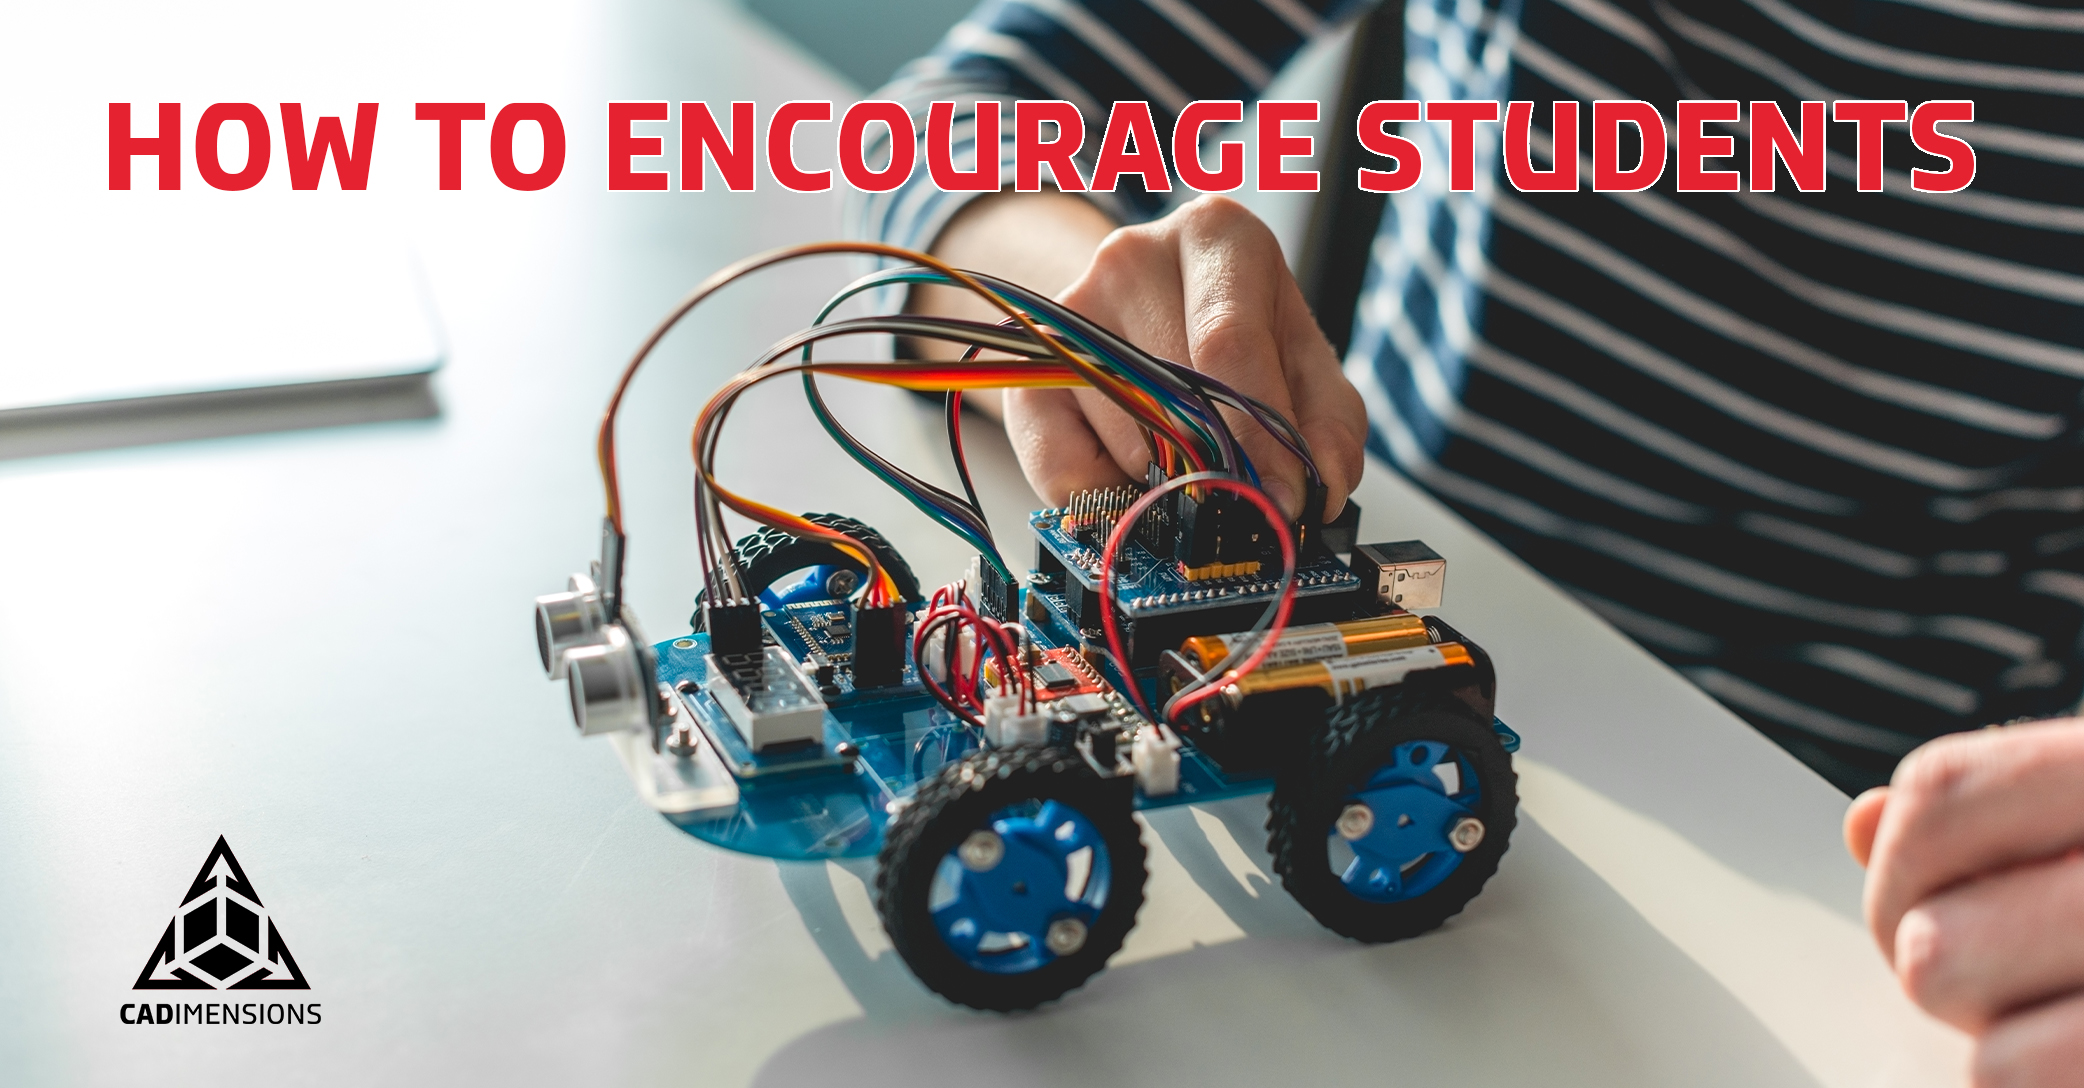 How to encourage students to pursue STEM